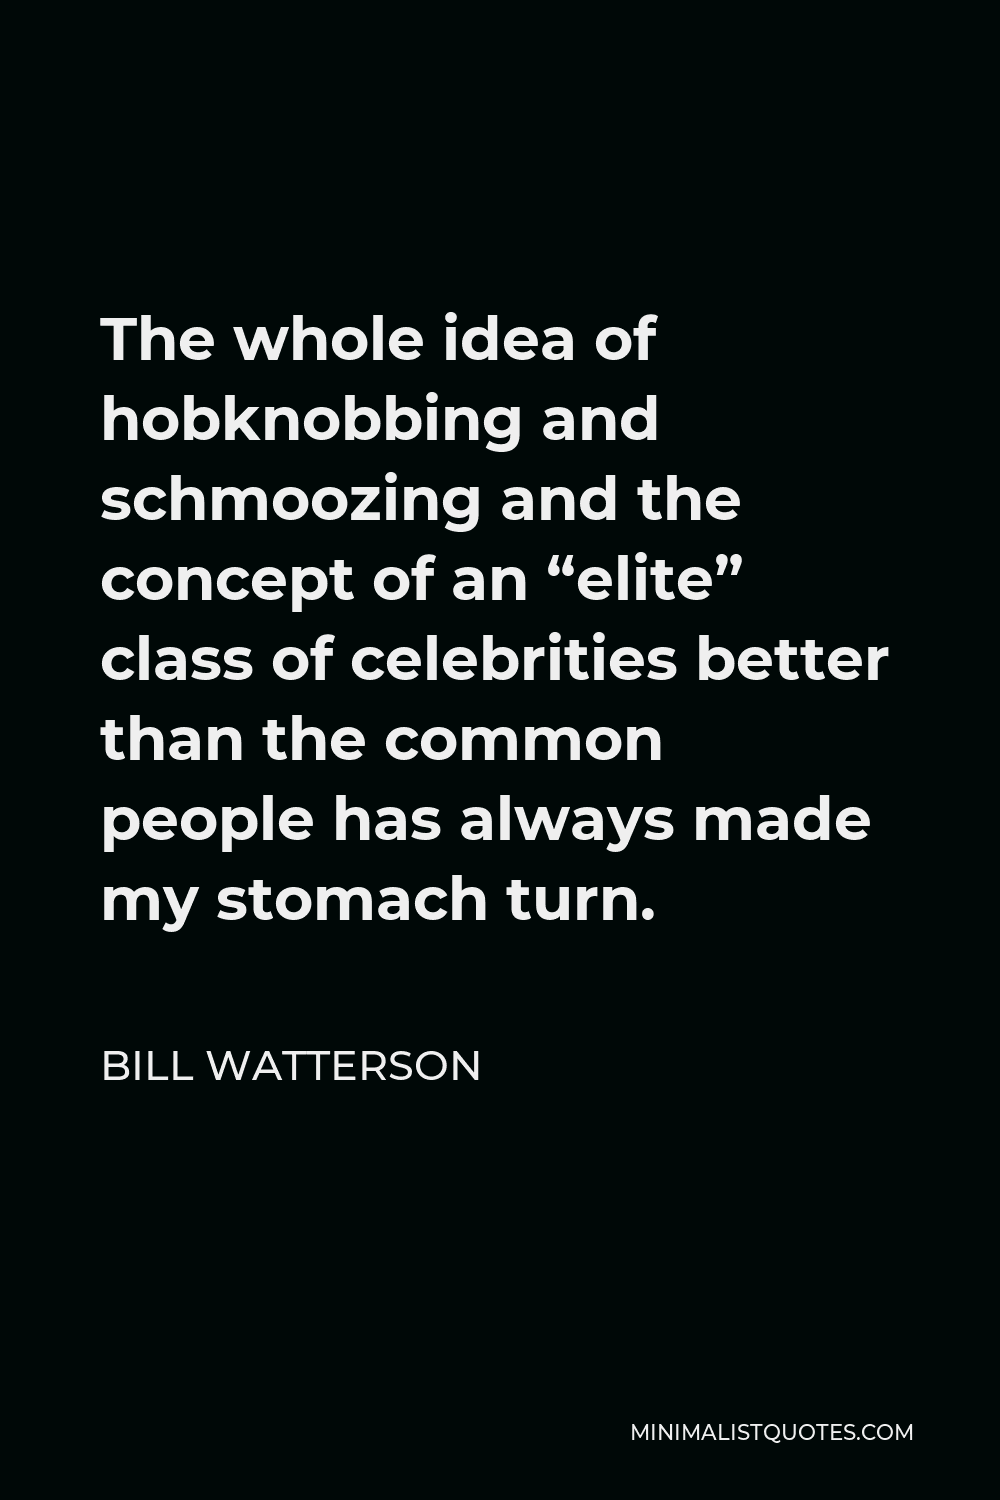 Bill Watterson Quote - The whole idea of hobknobbing and schmoozing and the concept of an “elite” class of celebrities better than the common people has always made my stomach turn.